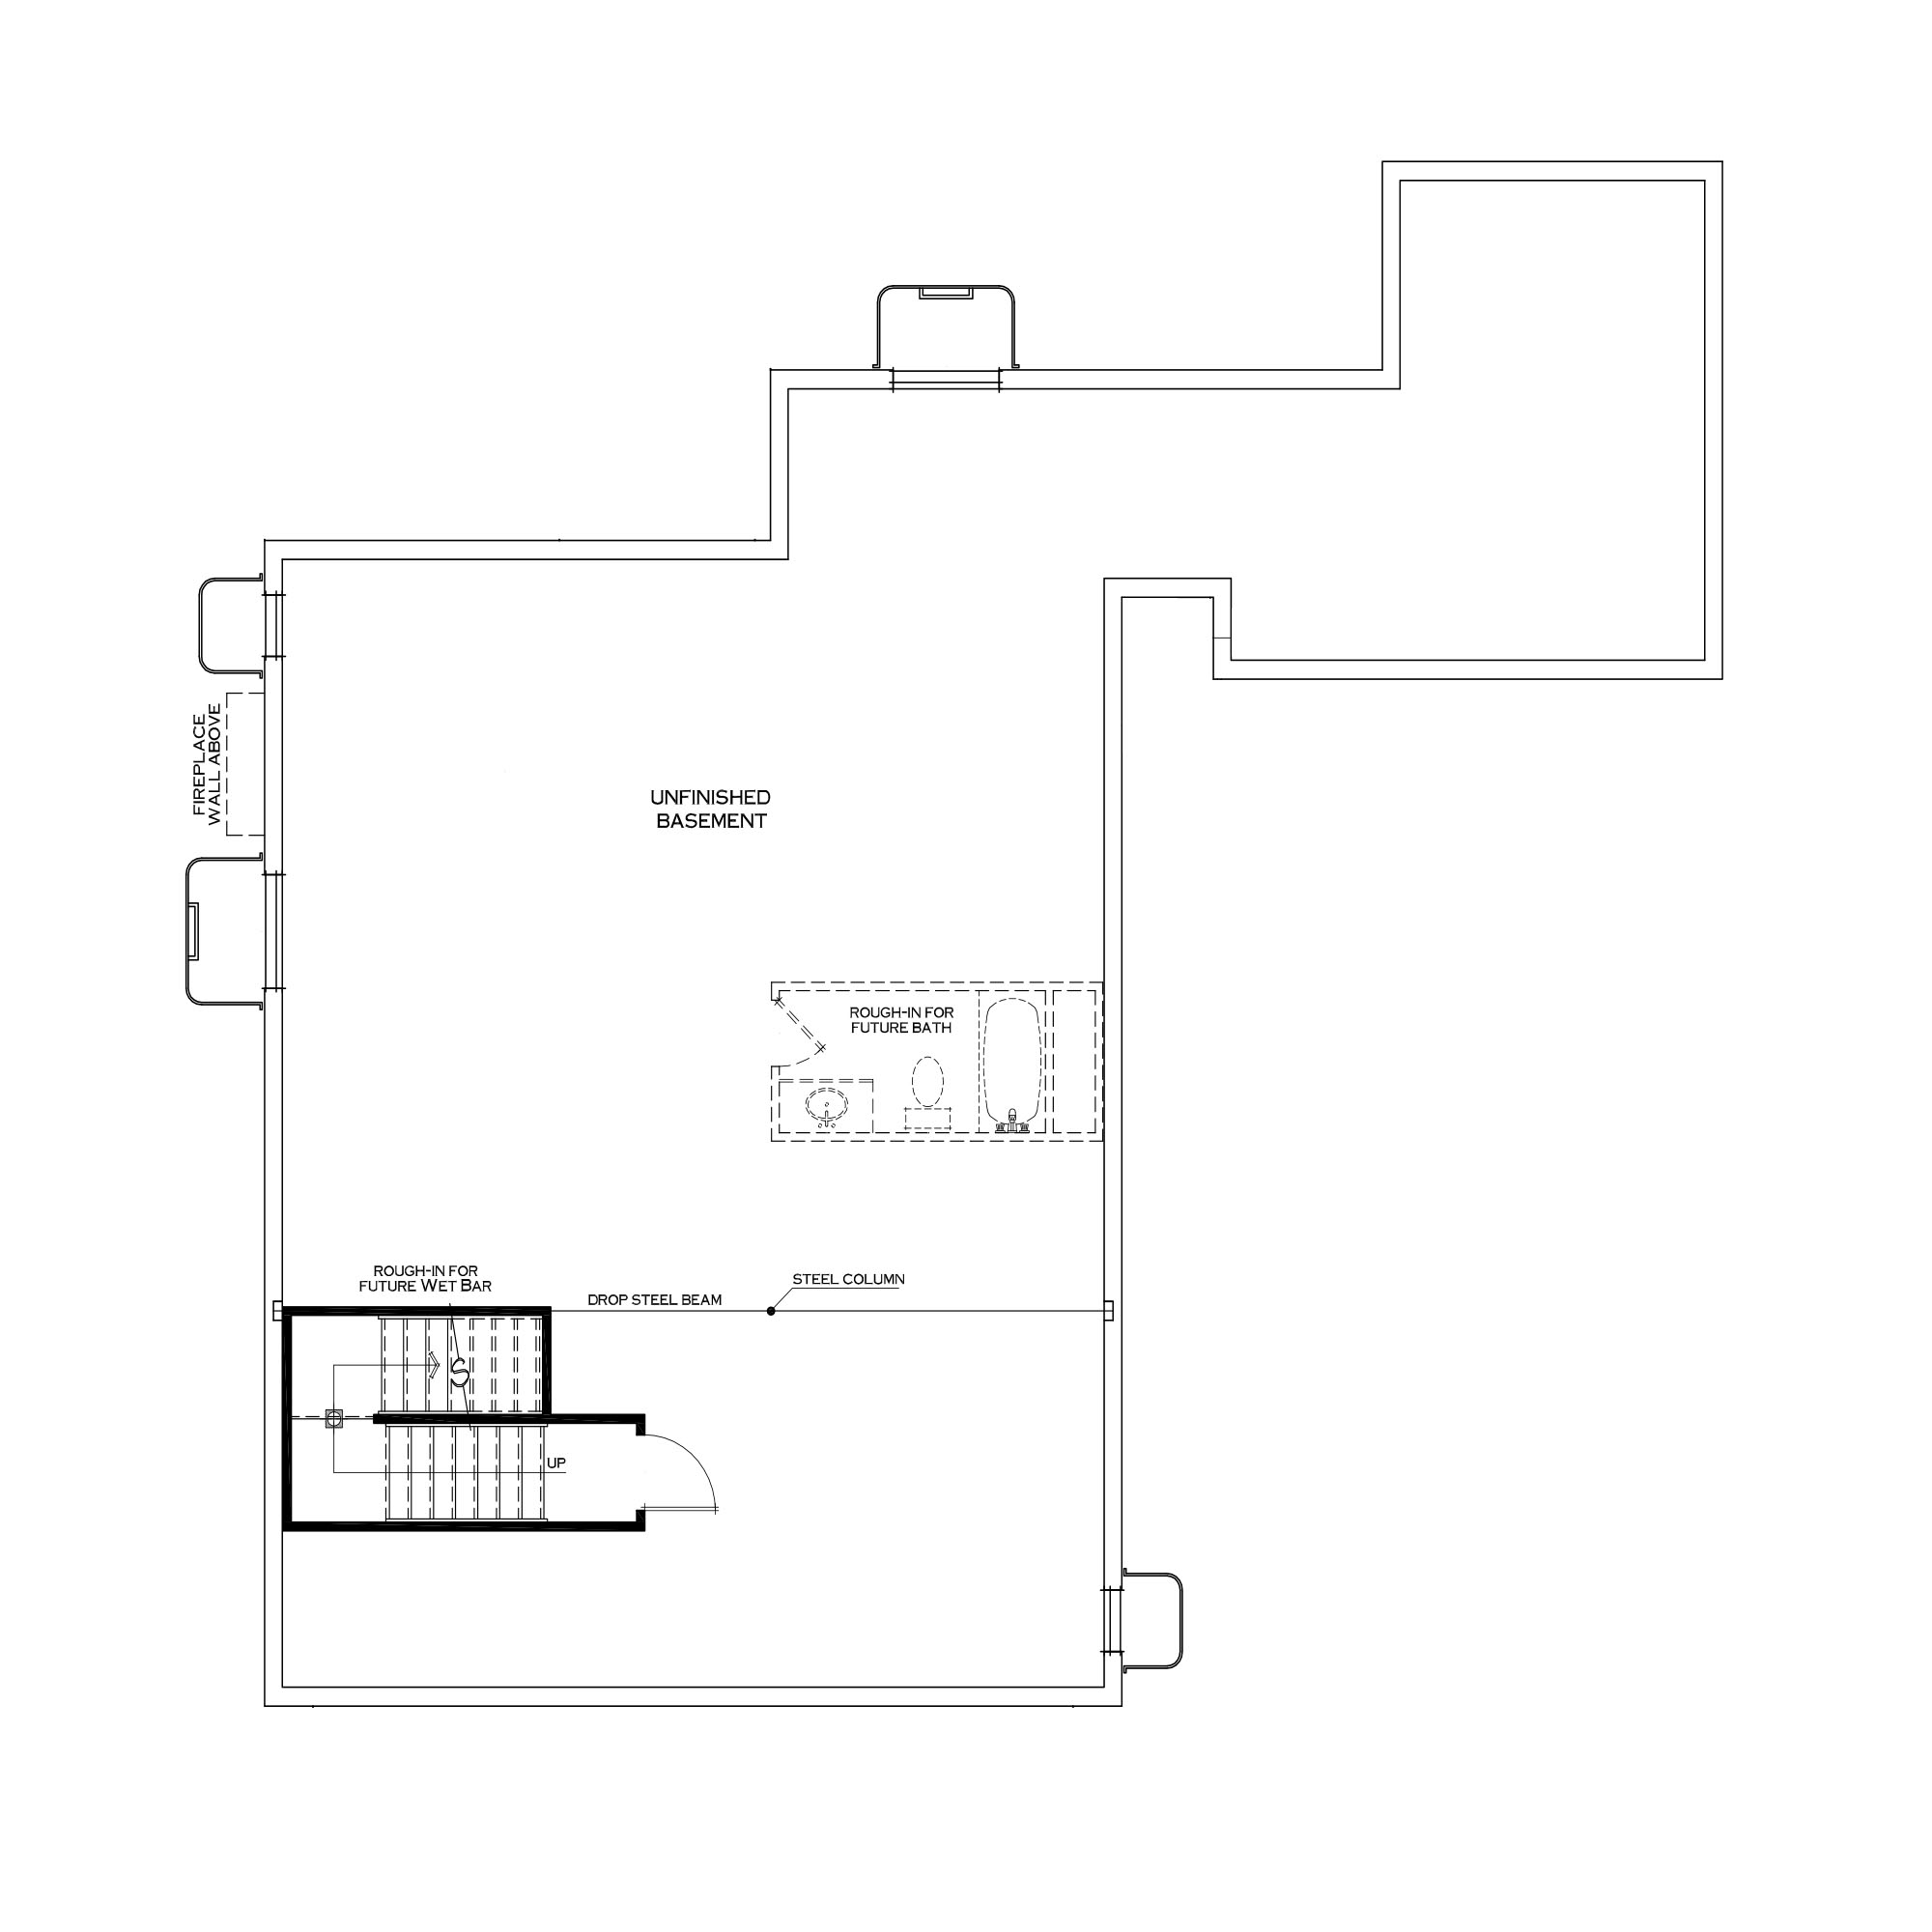 Standard Unfinished Basement with Rear Bedroom Above